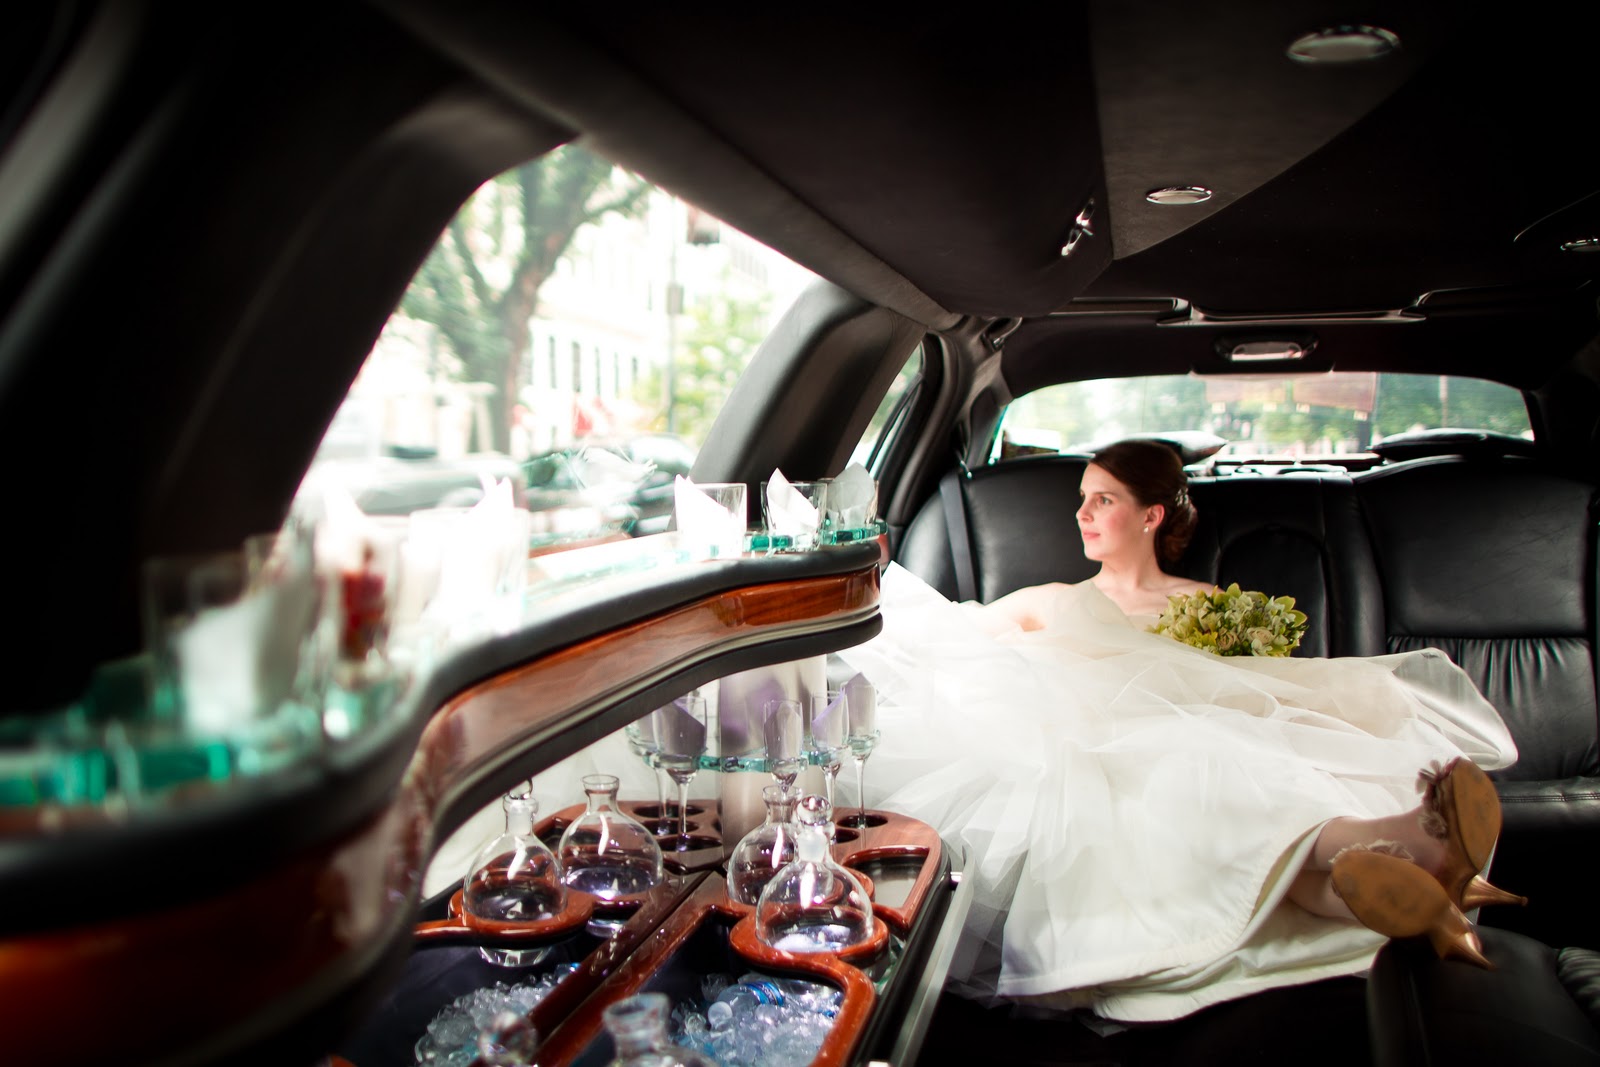 Limos for hire can make your wedding a majestic event in gold coast